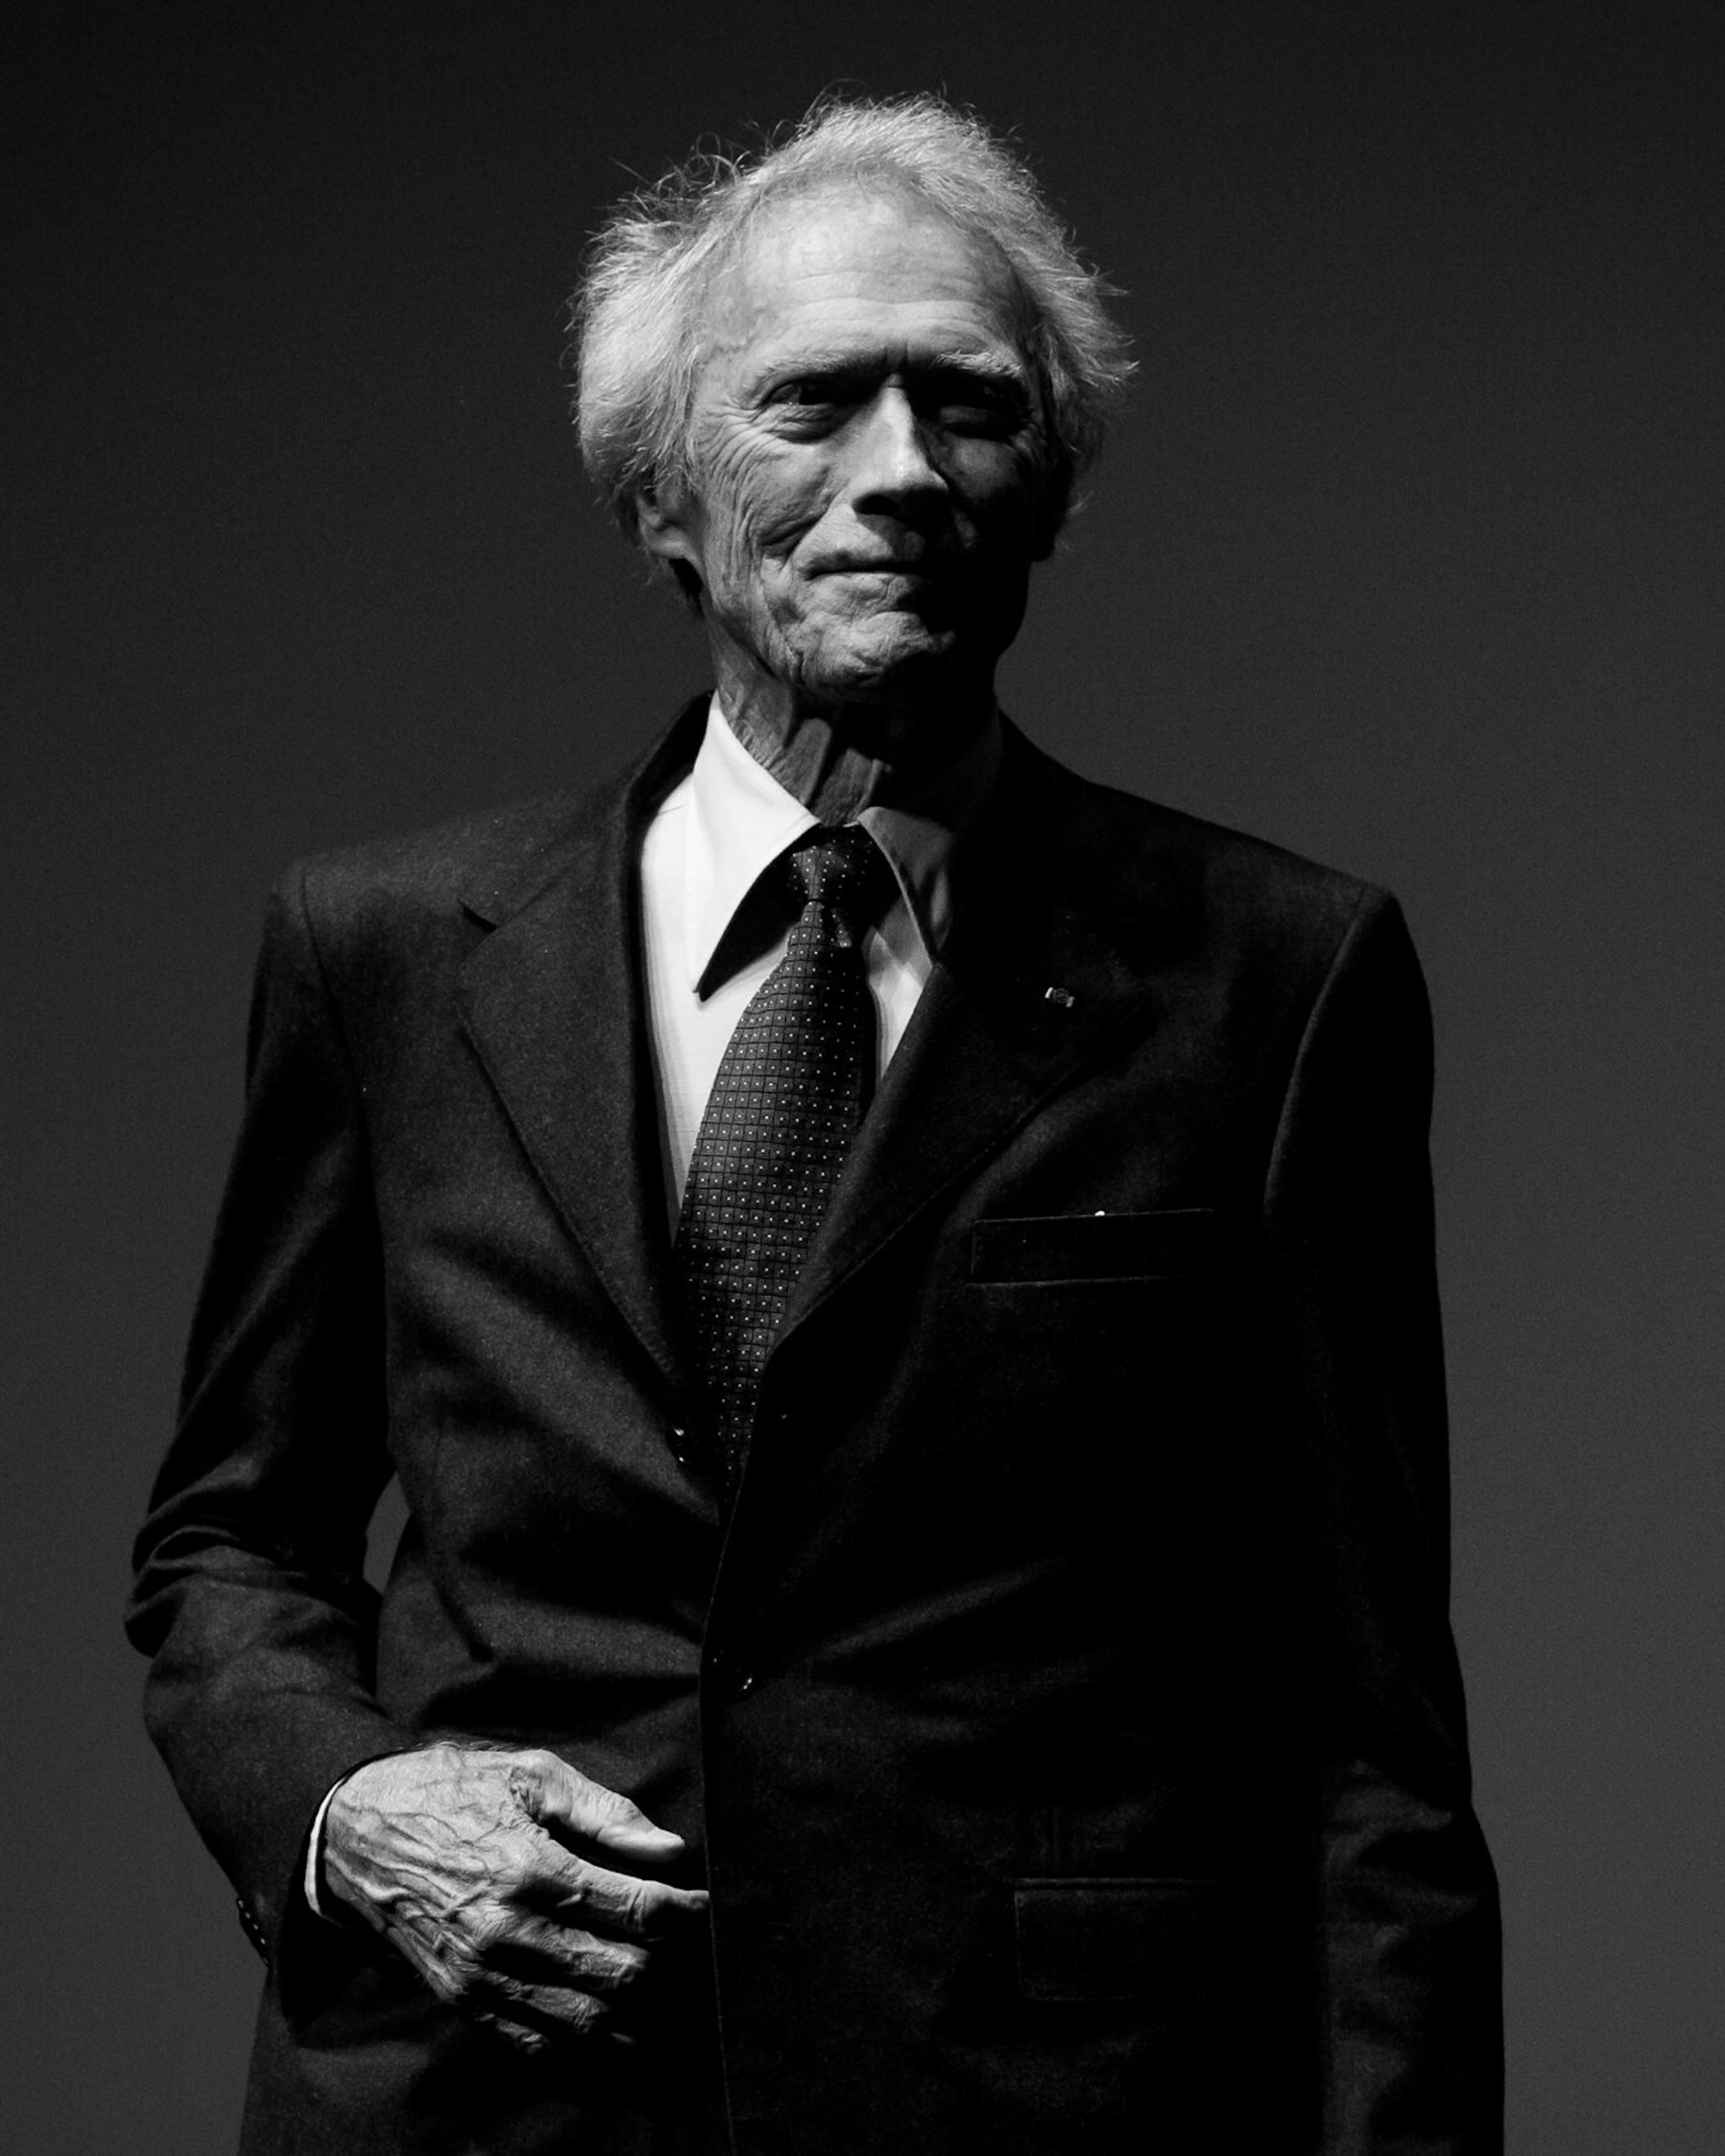 CANNES, FRANCE - MAY 20: (EDITORS NOTE: Image has been converted to black and white.) Clint Eastwood is seen on stage during the 'Unforgiven' restored copy presentation during the 70th annual Cannes Film Festival at Salle Debussy on May 20, 2017 in Cannes, France. (Photo by Matthias Nareyek/French Select)